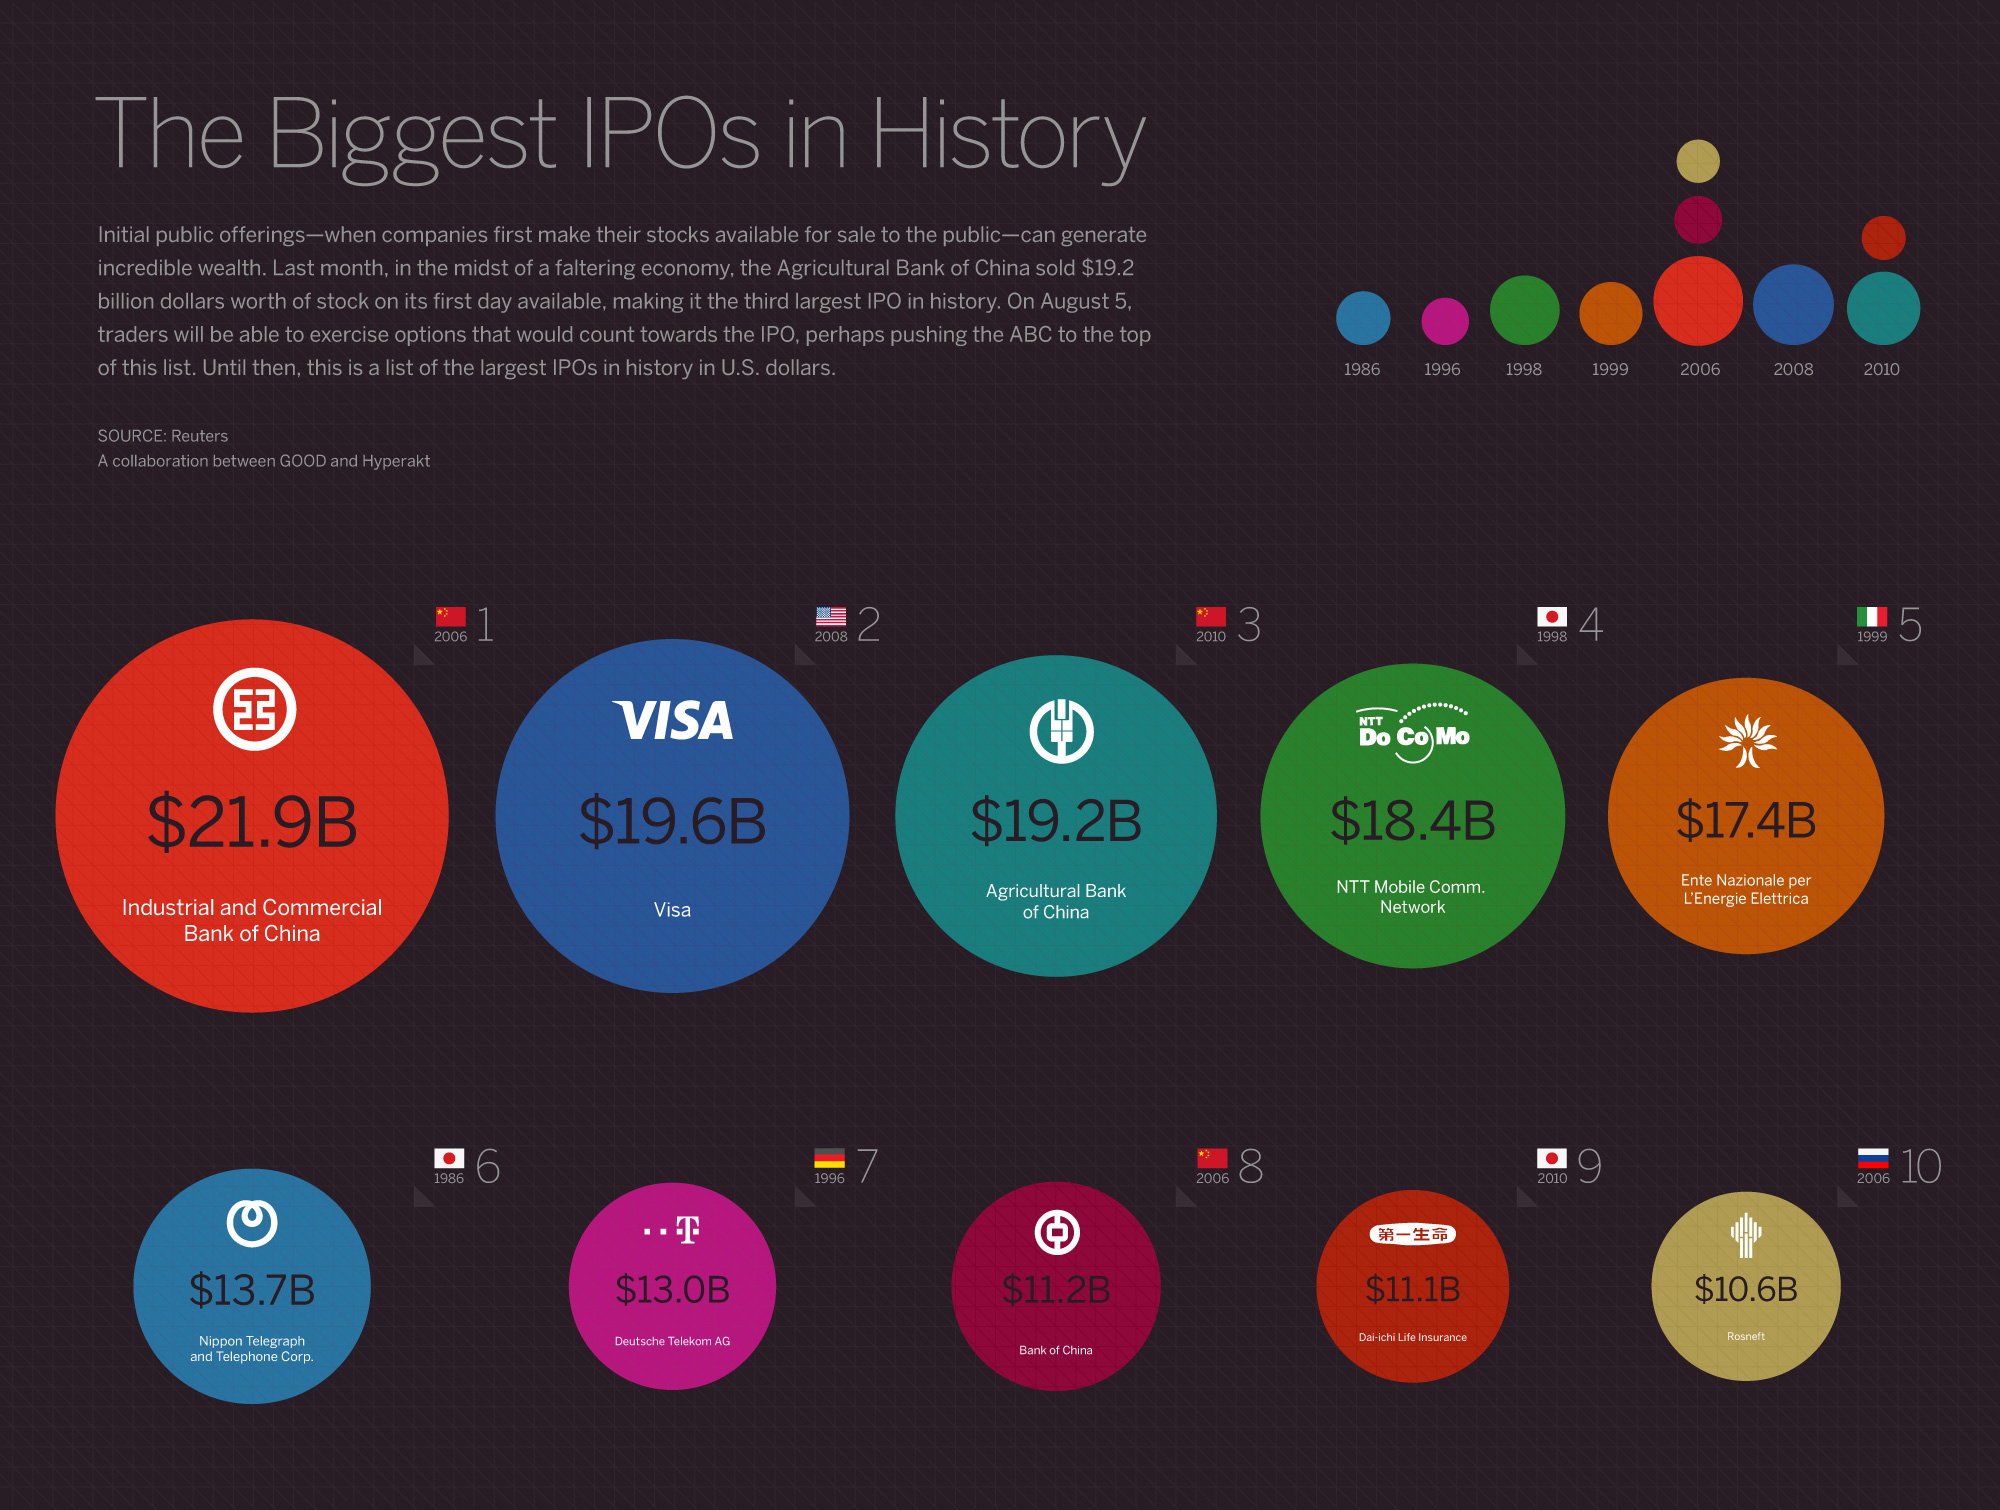 The Biggest IPOs in History Visual.ly